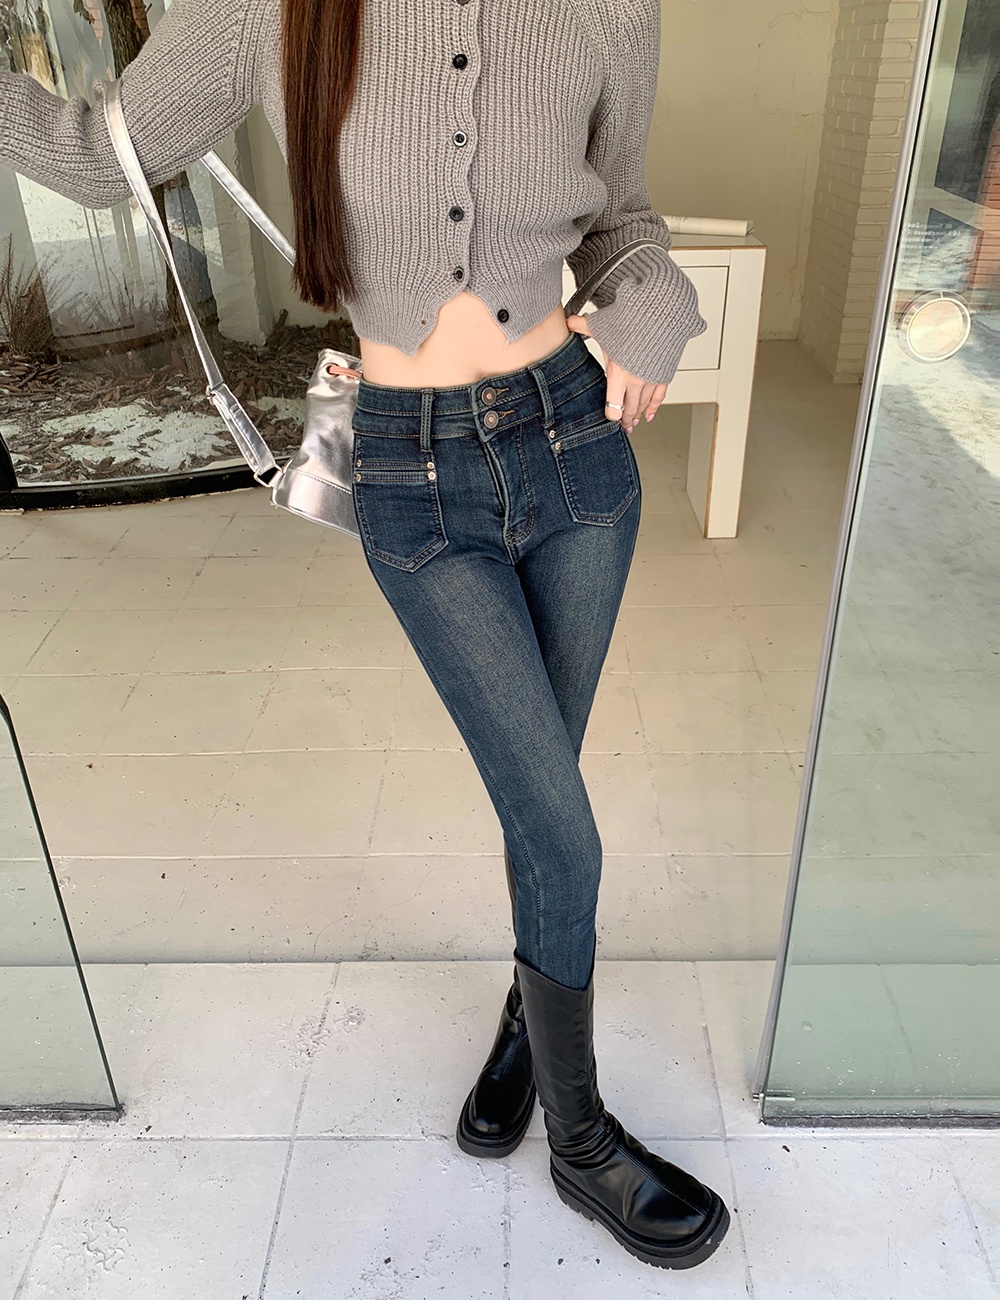 High waist retro elasticity American style jeans for women